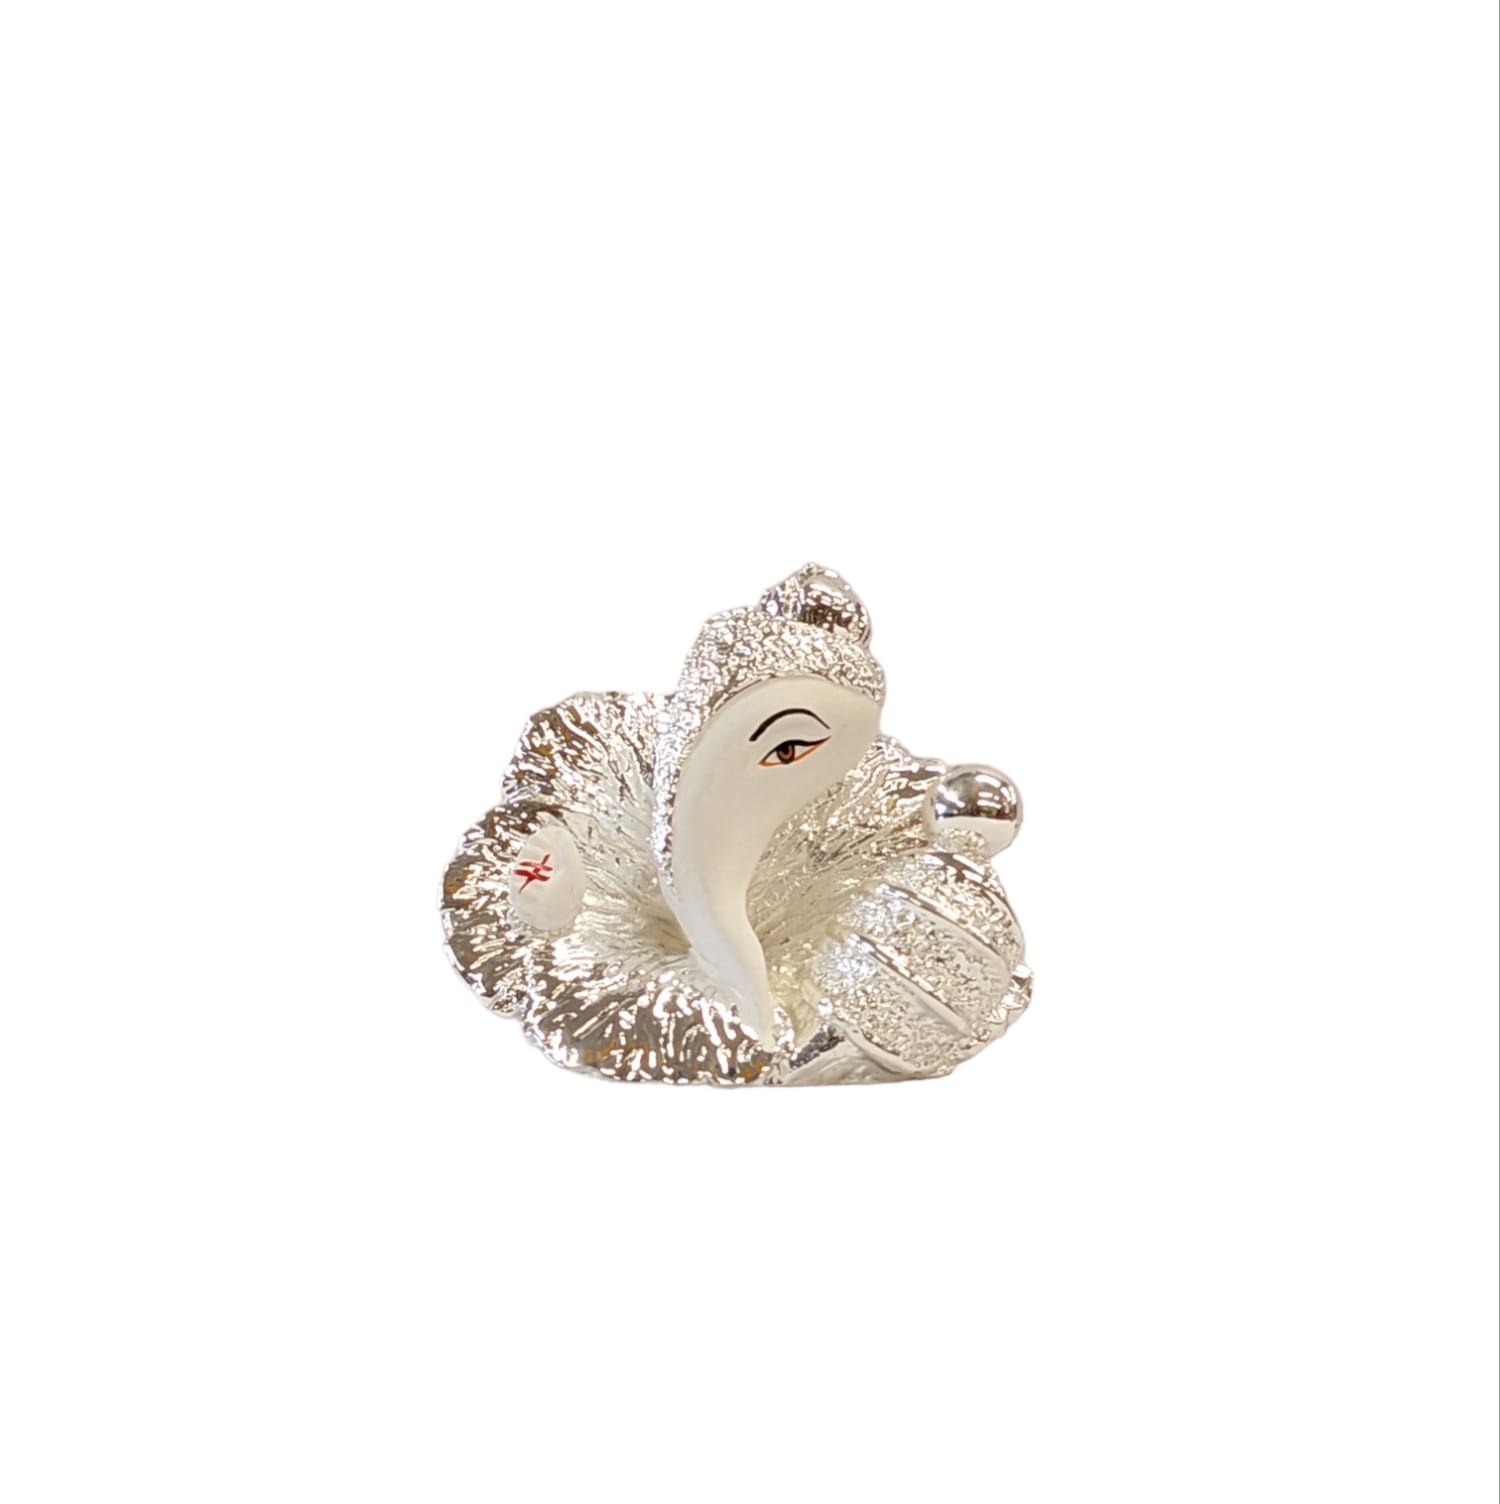 Image of a Silver plated Ganesha Car dashboard Idol, Great Gift idea for house warming, office